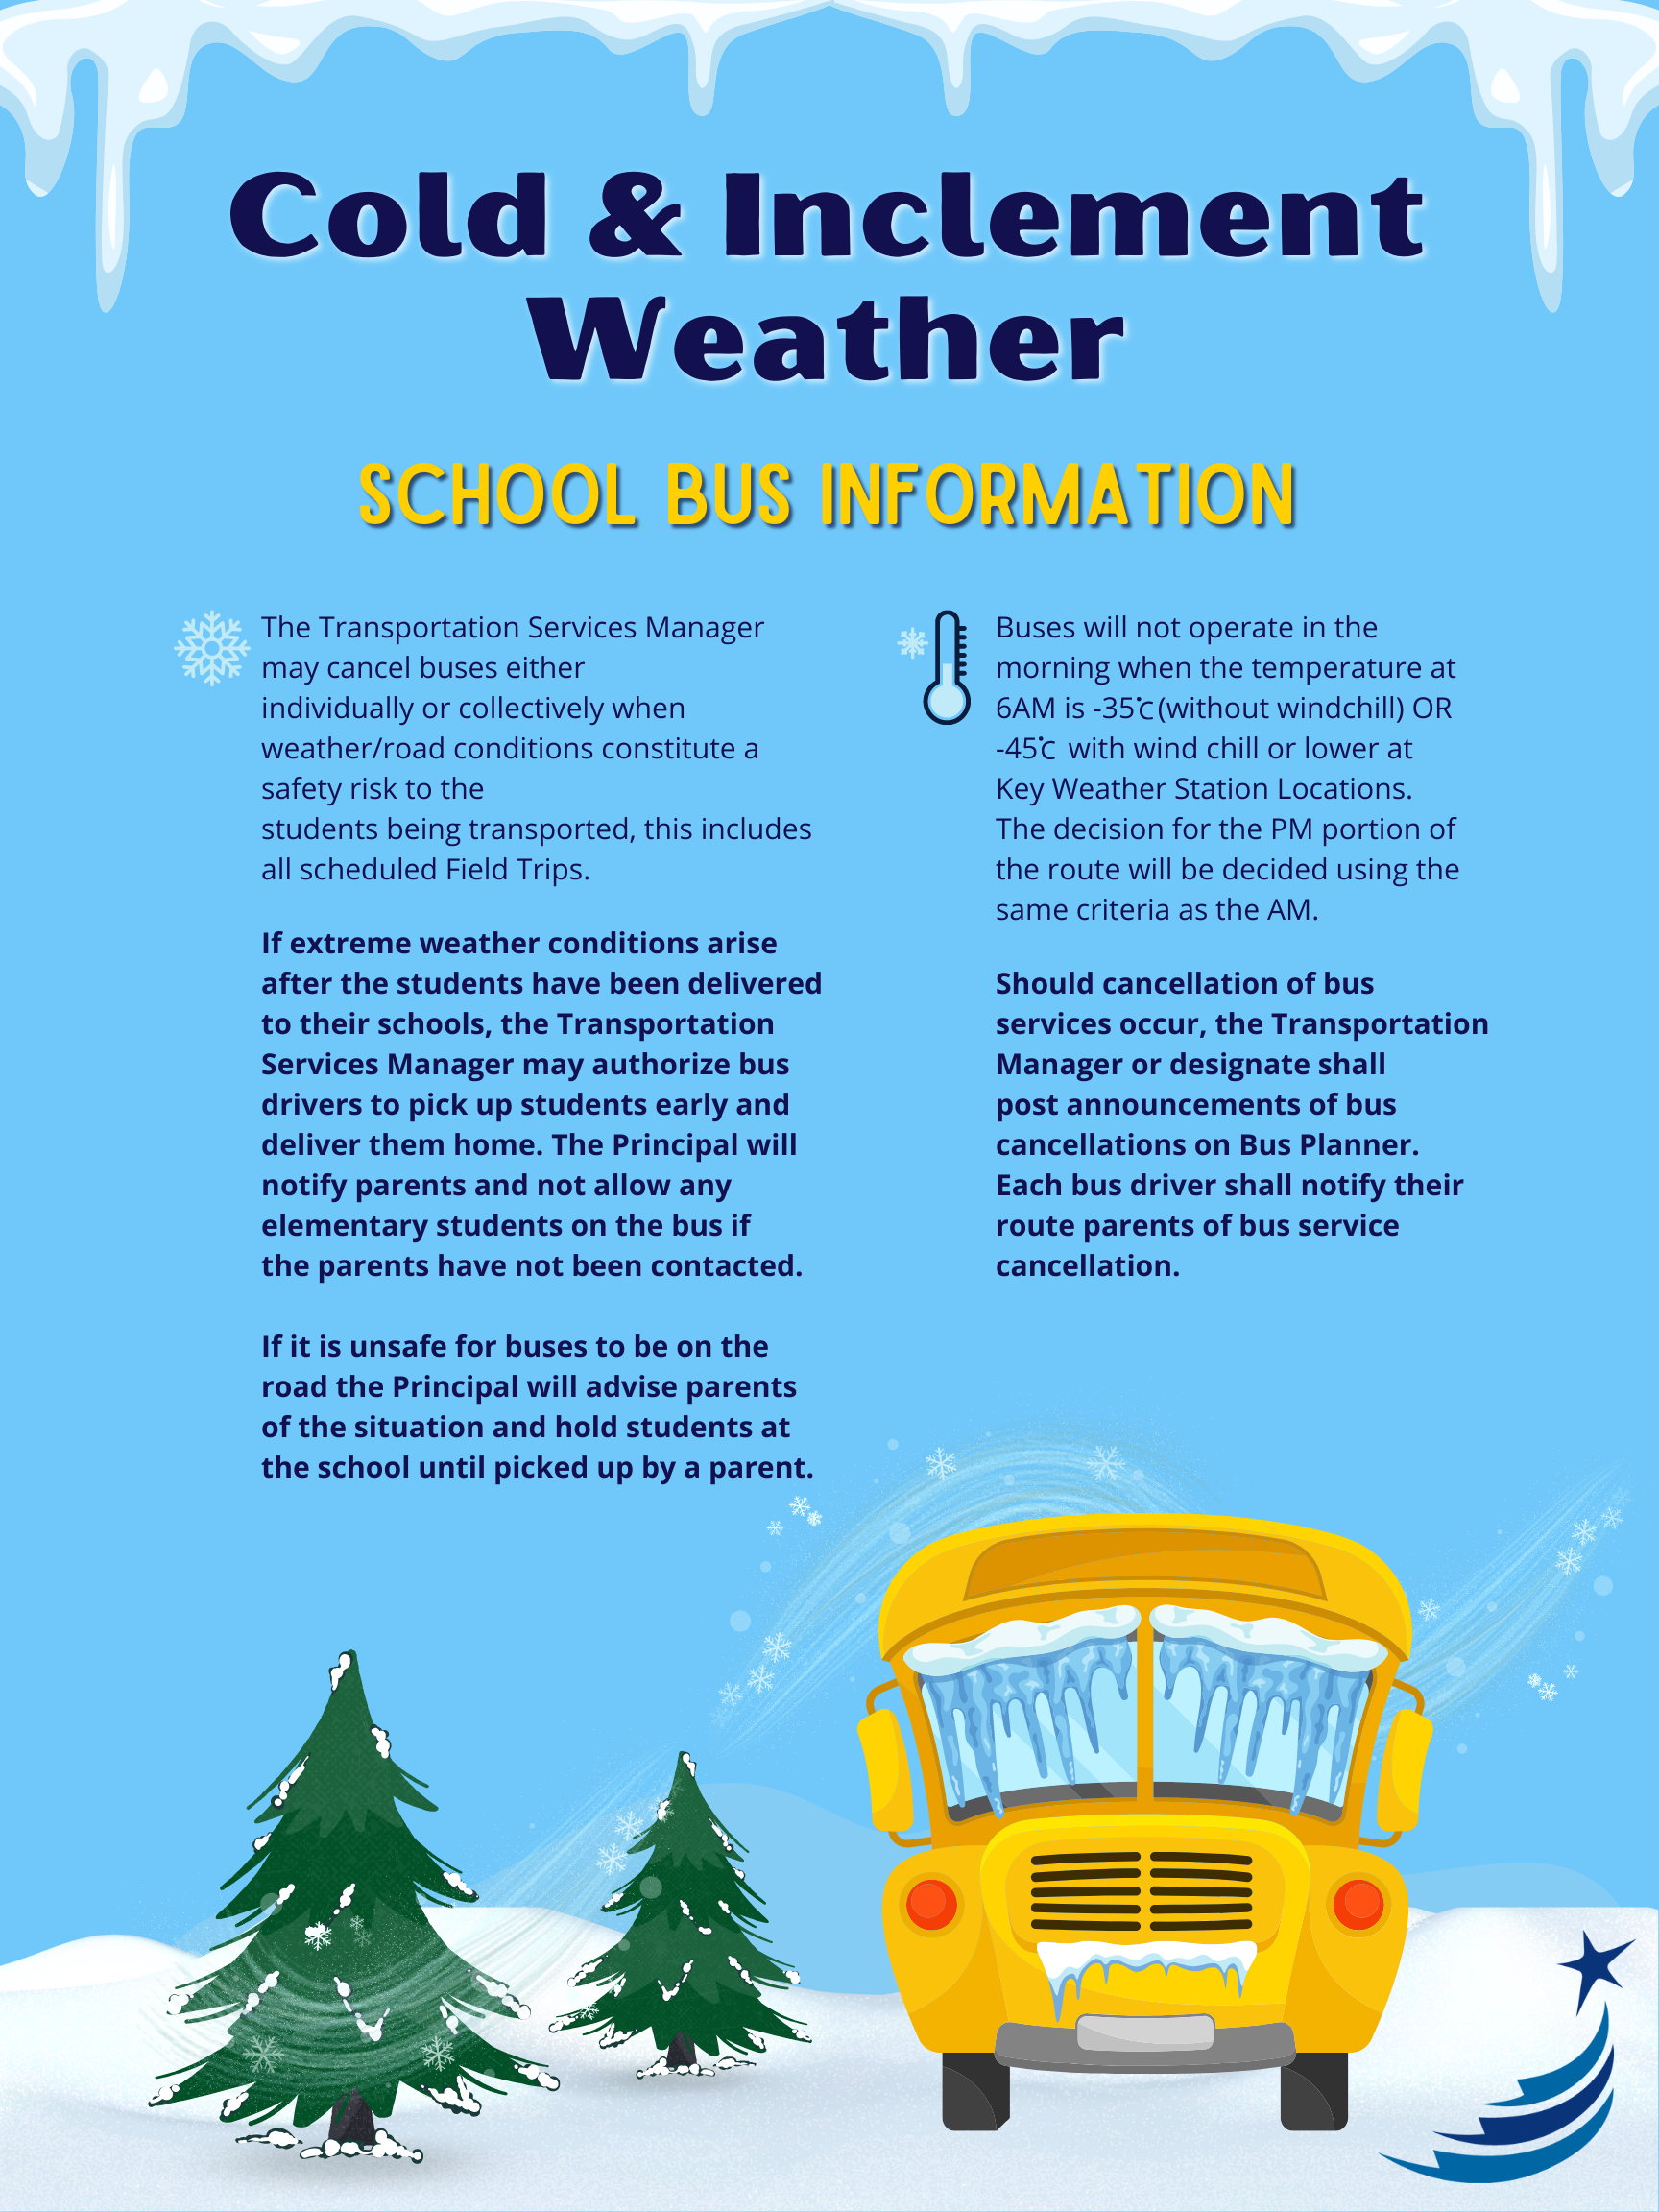 Cold & Inclement Weather Information